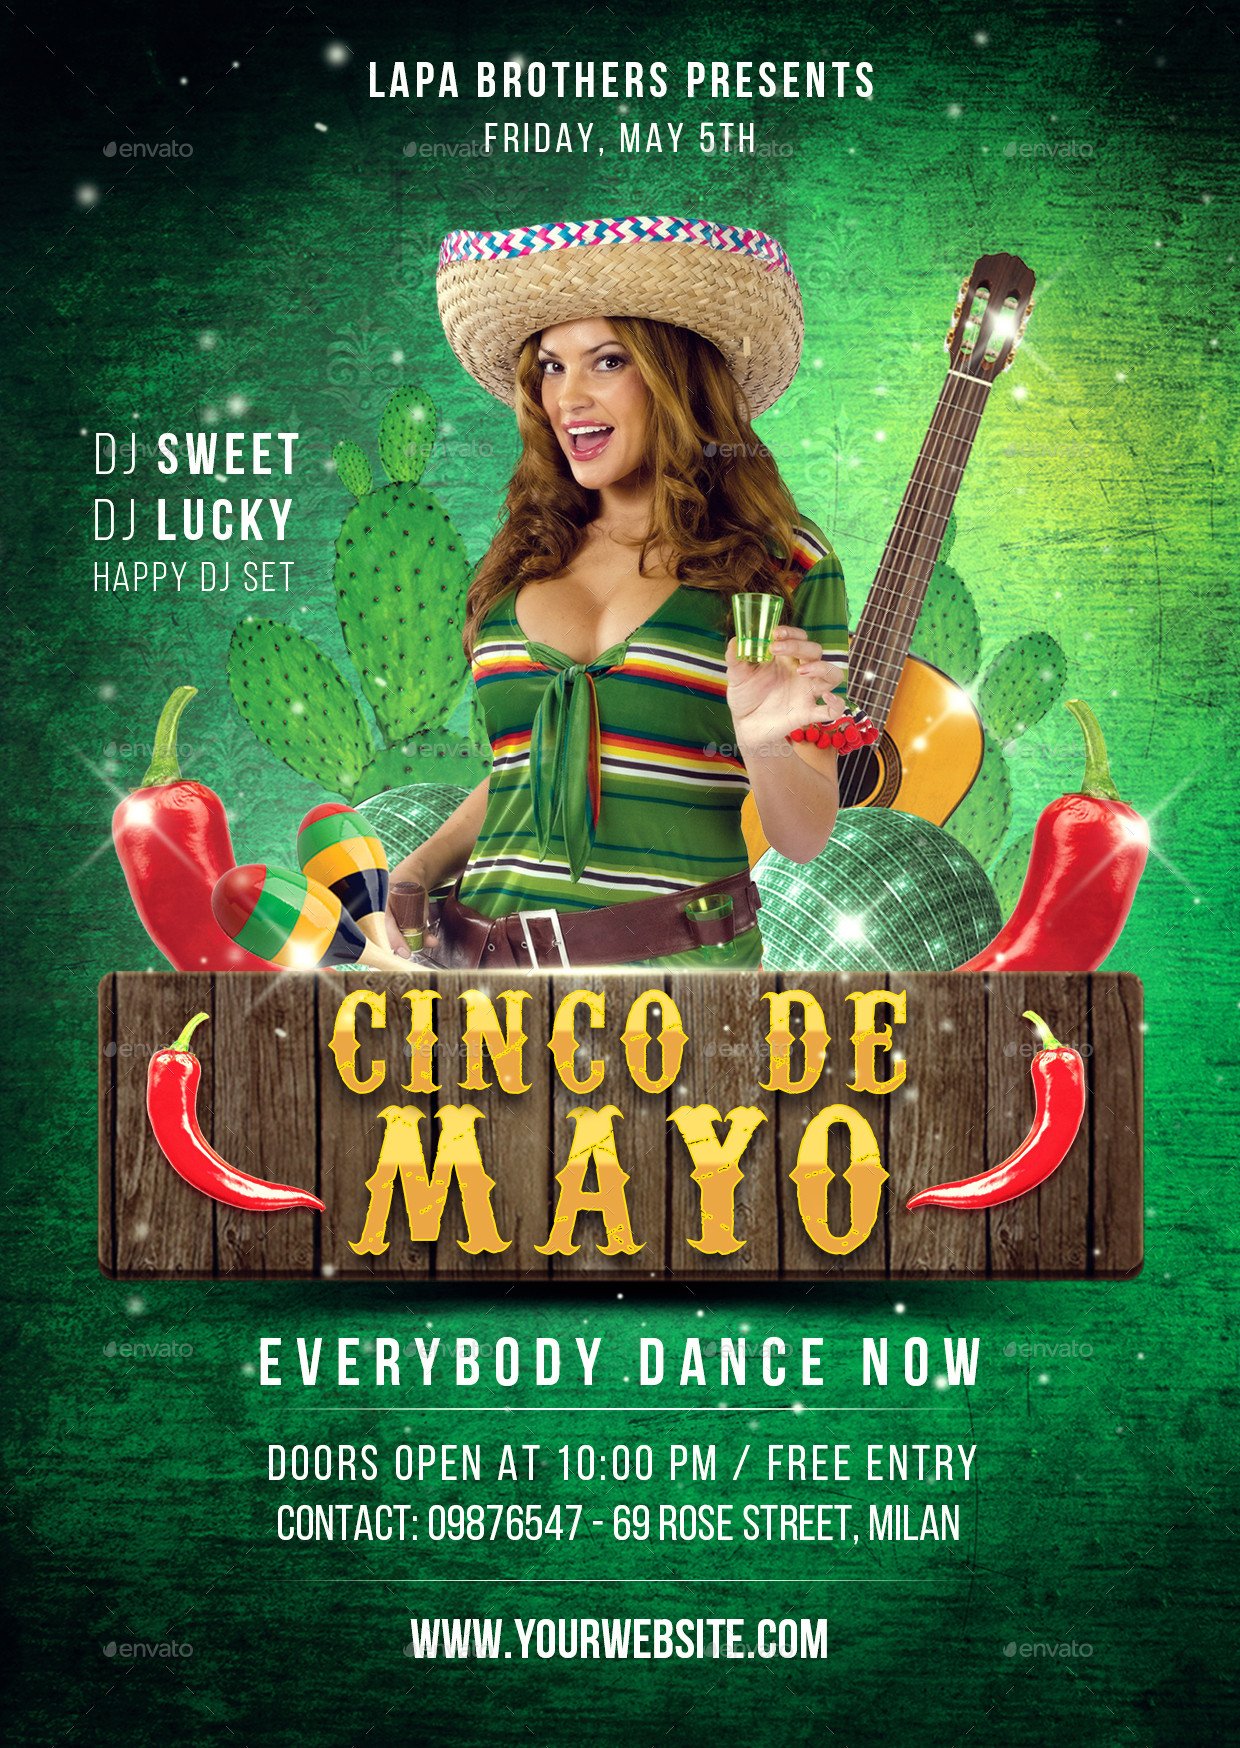 Cinco de Mayo Flyer Template by Lapabrothers